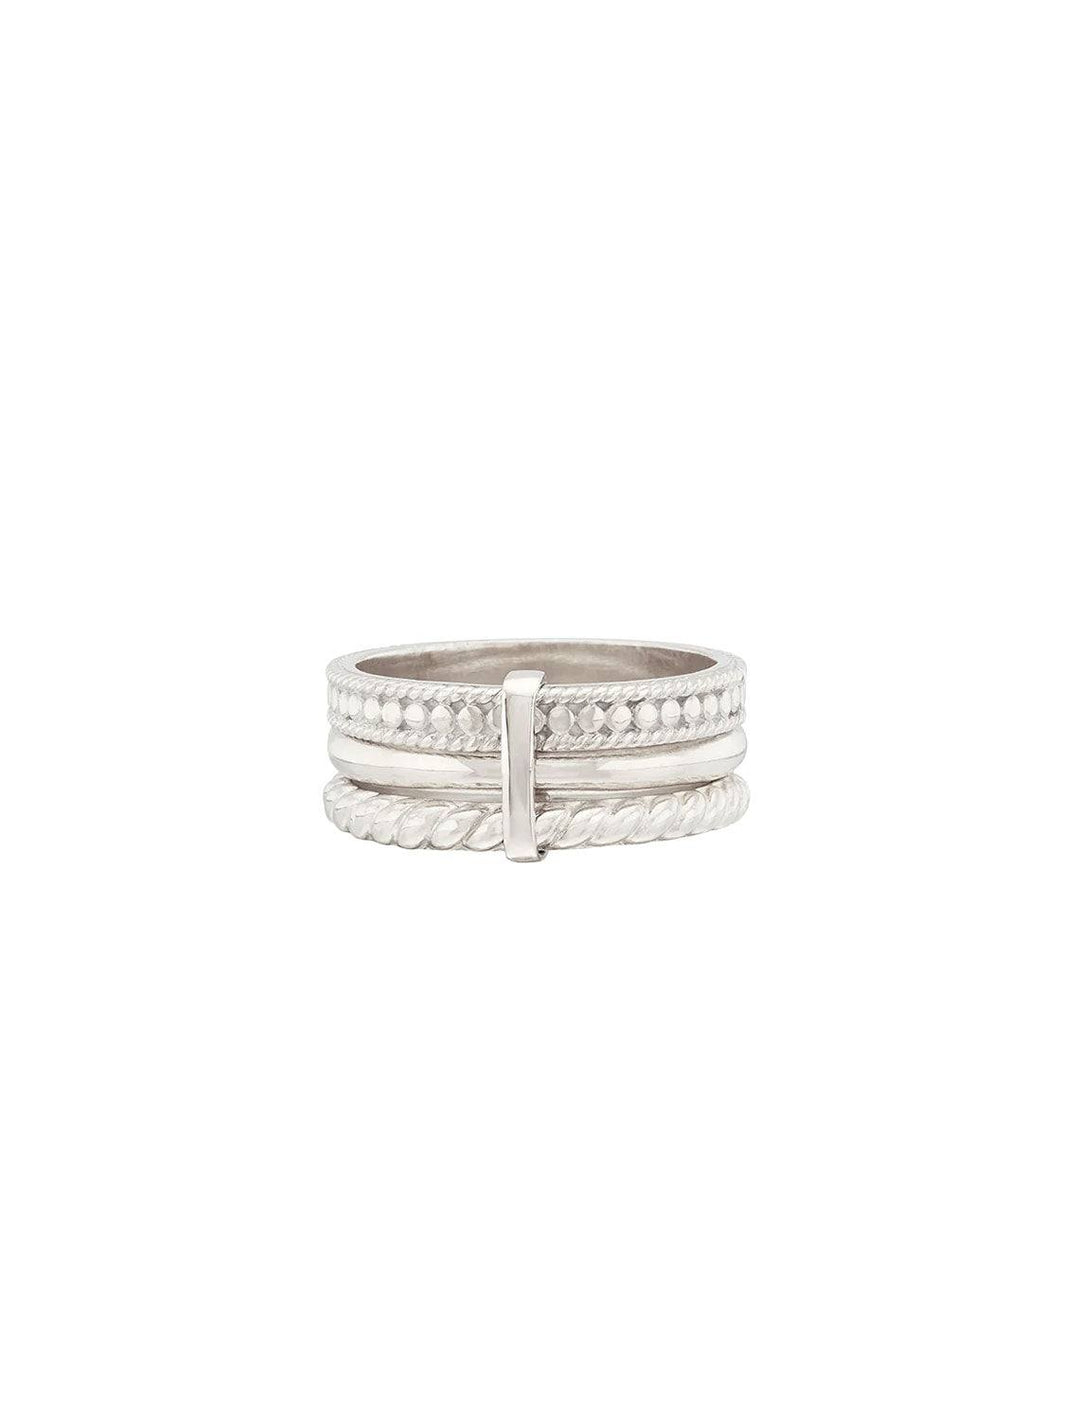 Back view of Anna Beck's classic triple stacking ring.